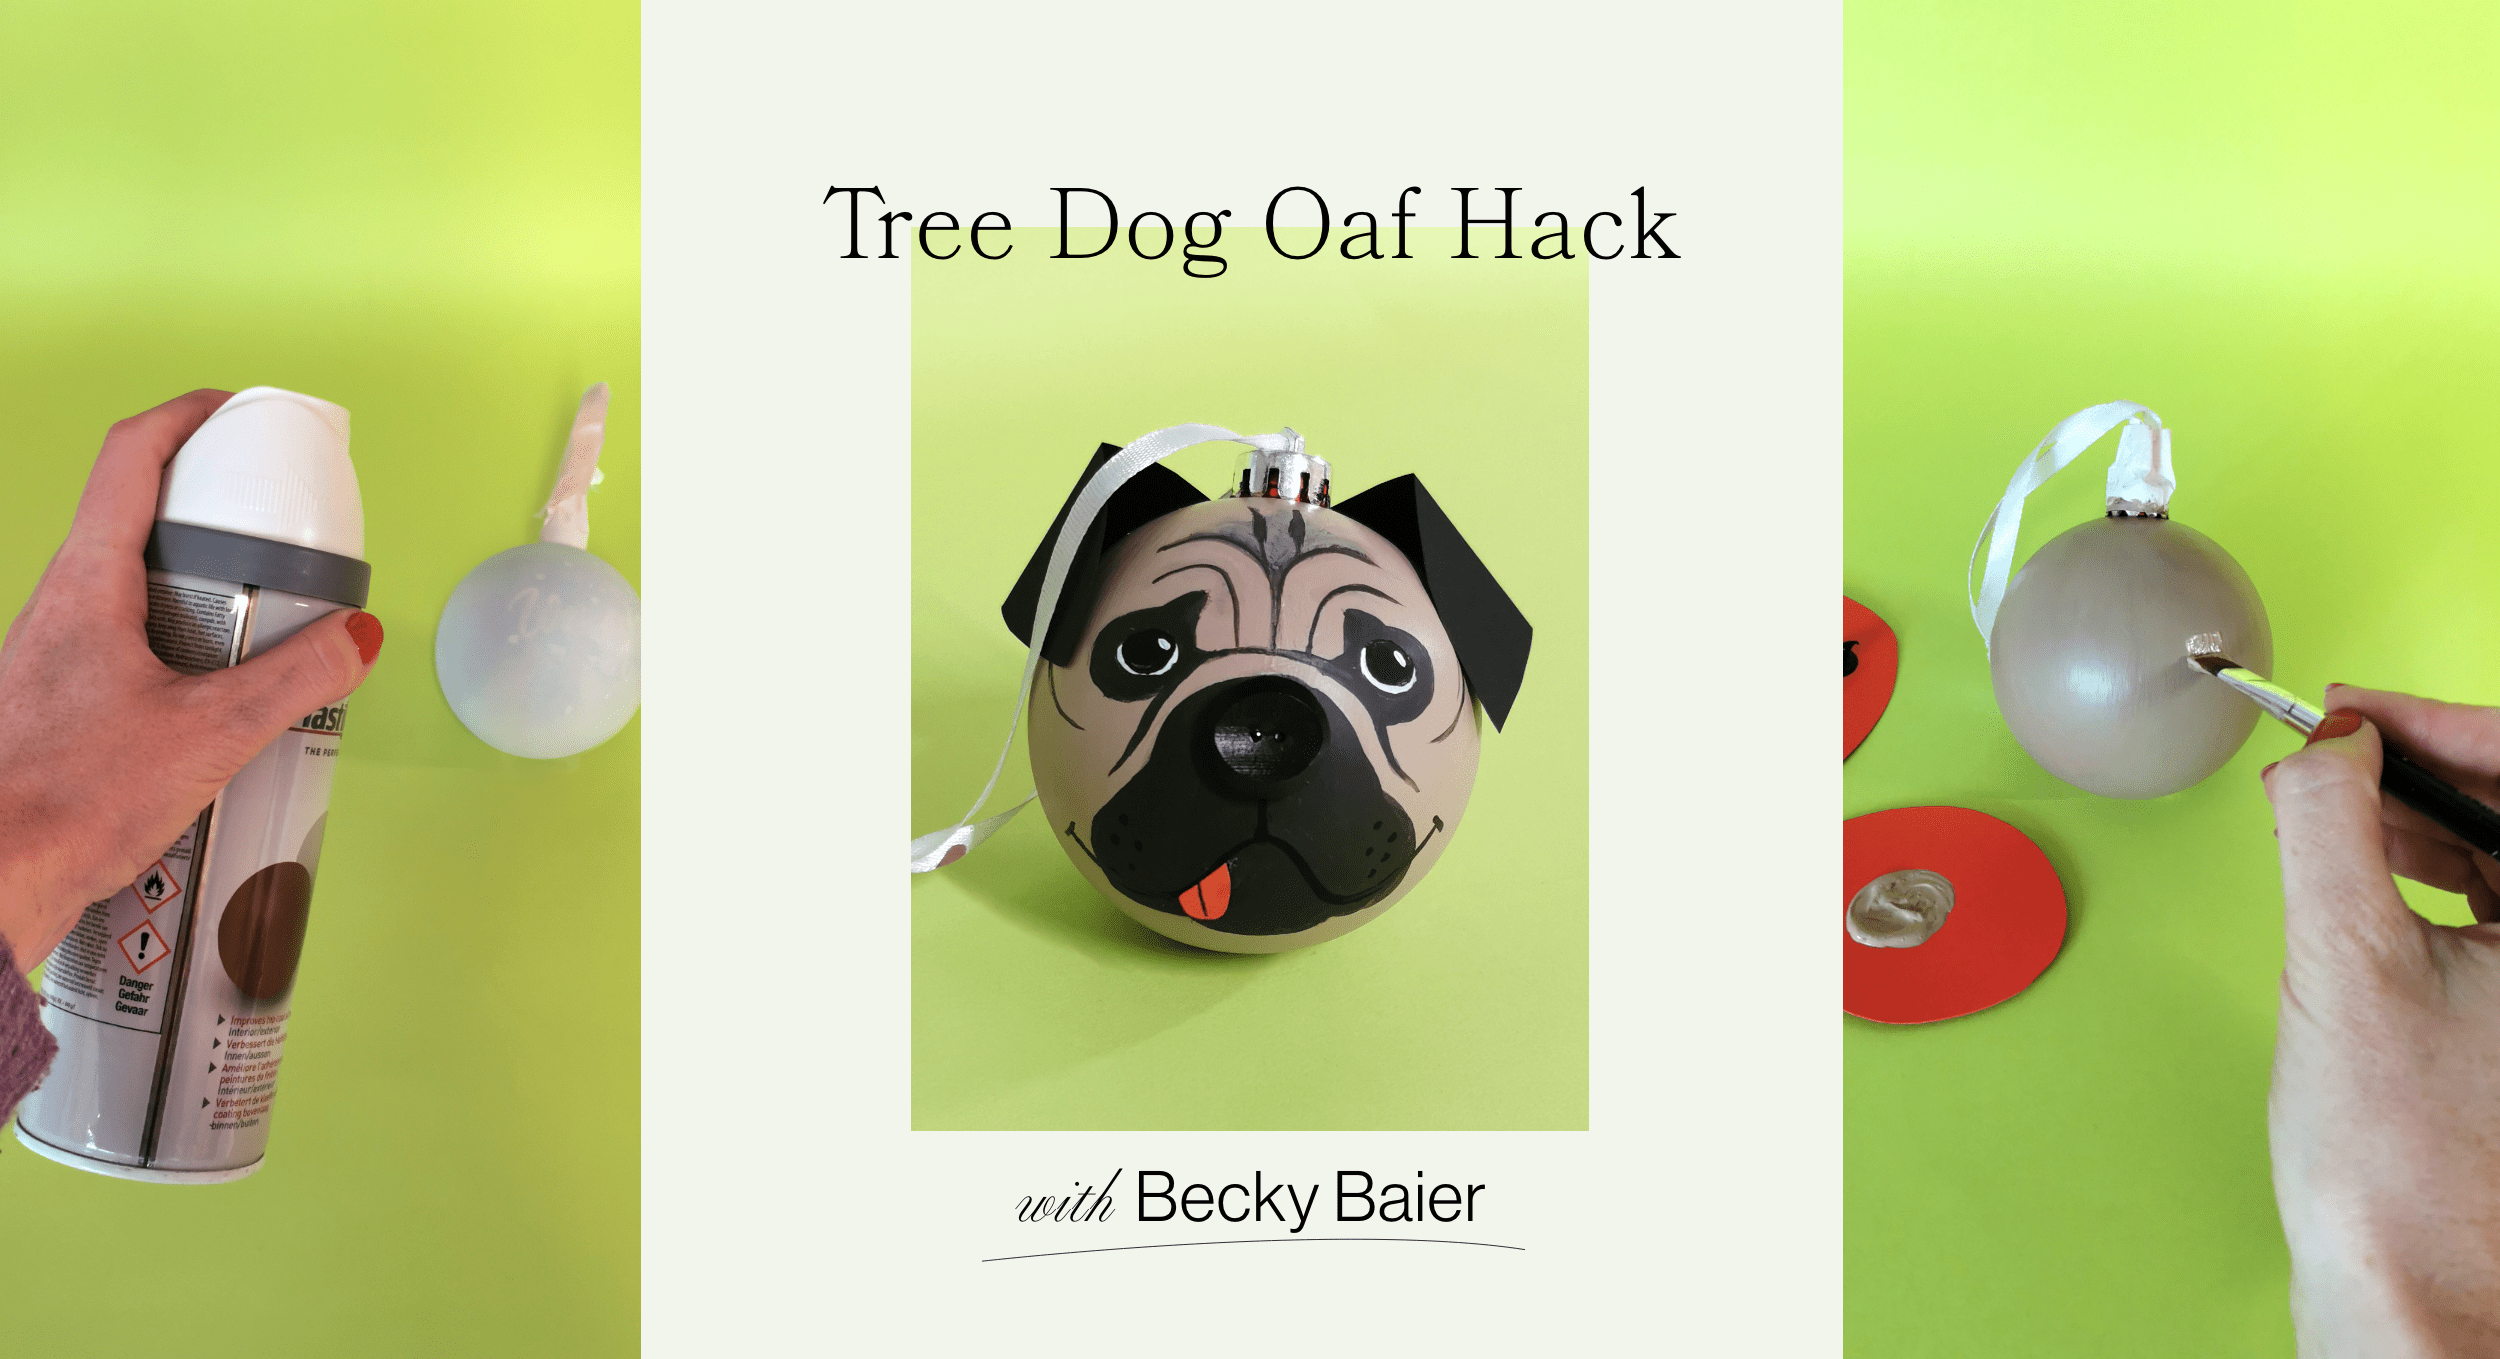 TREE DOG OAF HACK with Becky Baier